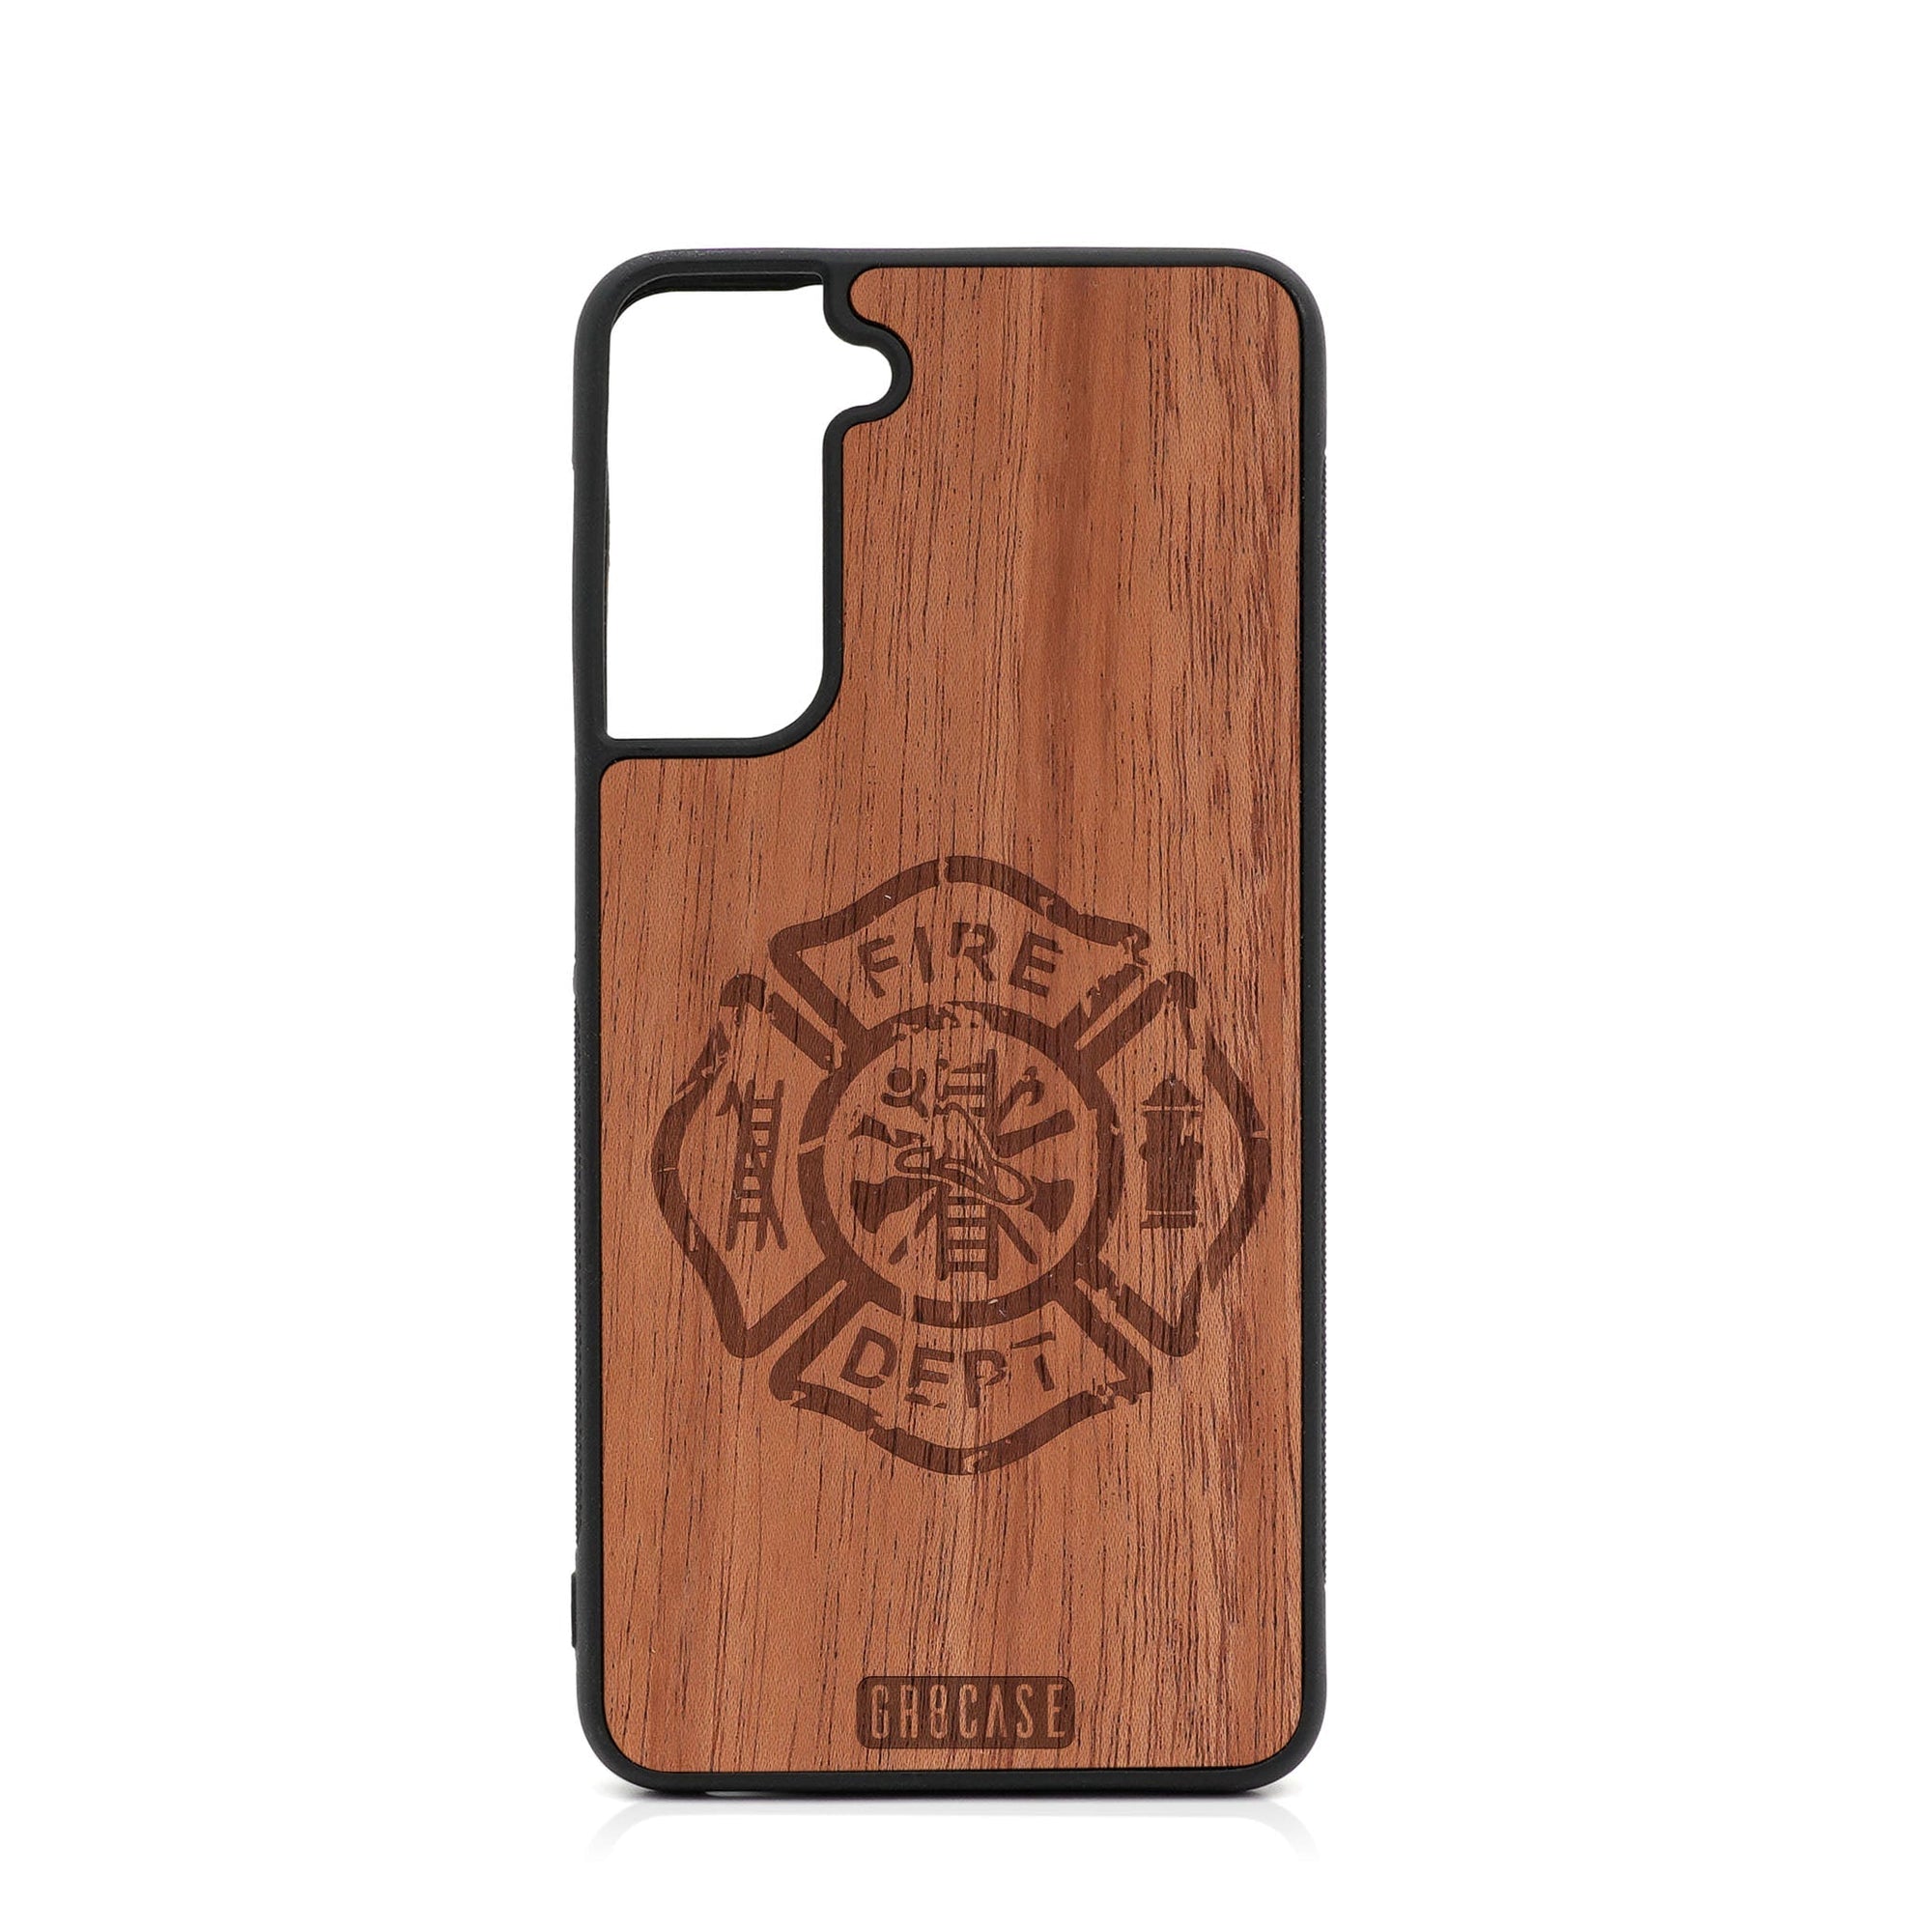 Fire Department Design Wood Case For Samsung Galaxy S21 FE 5G